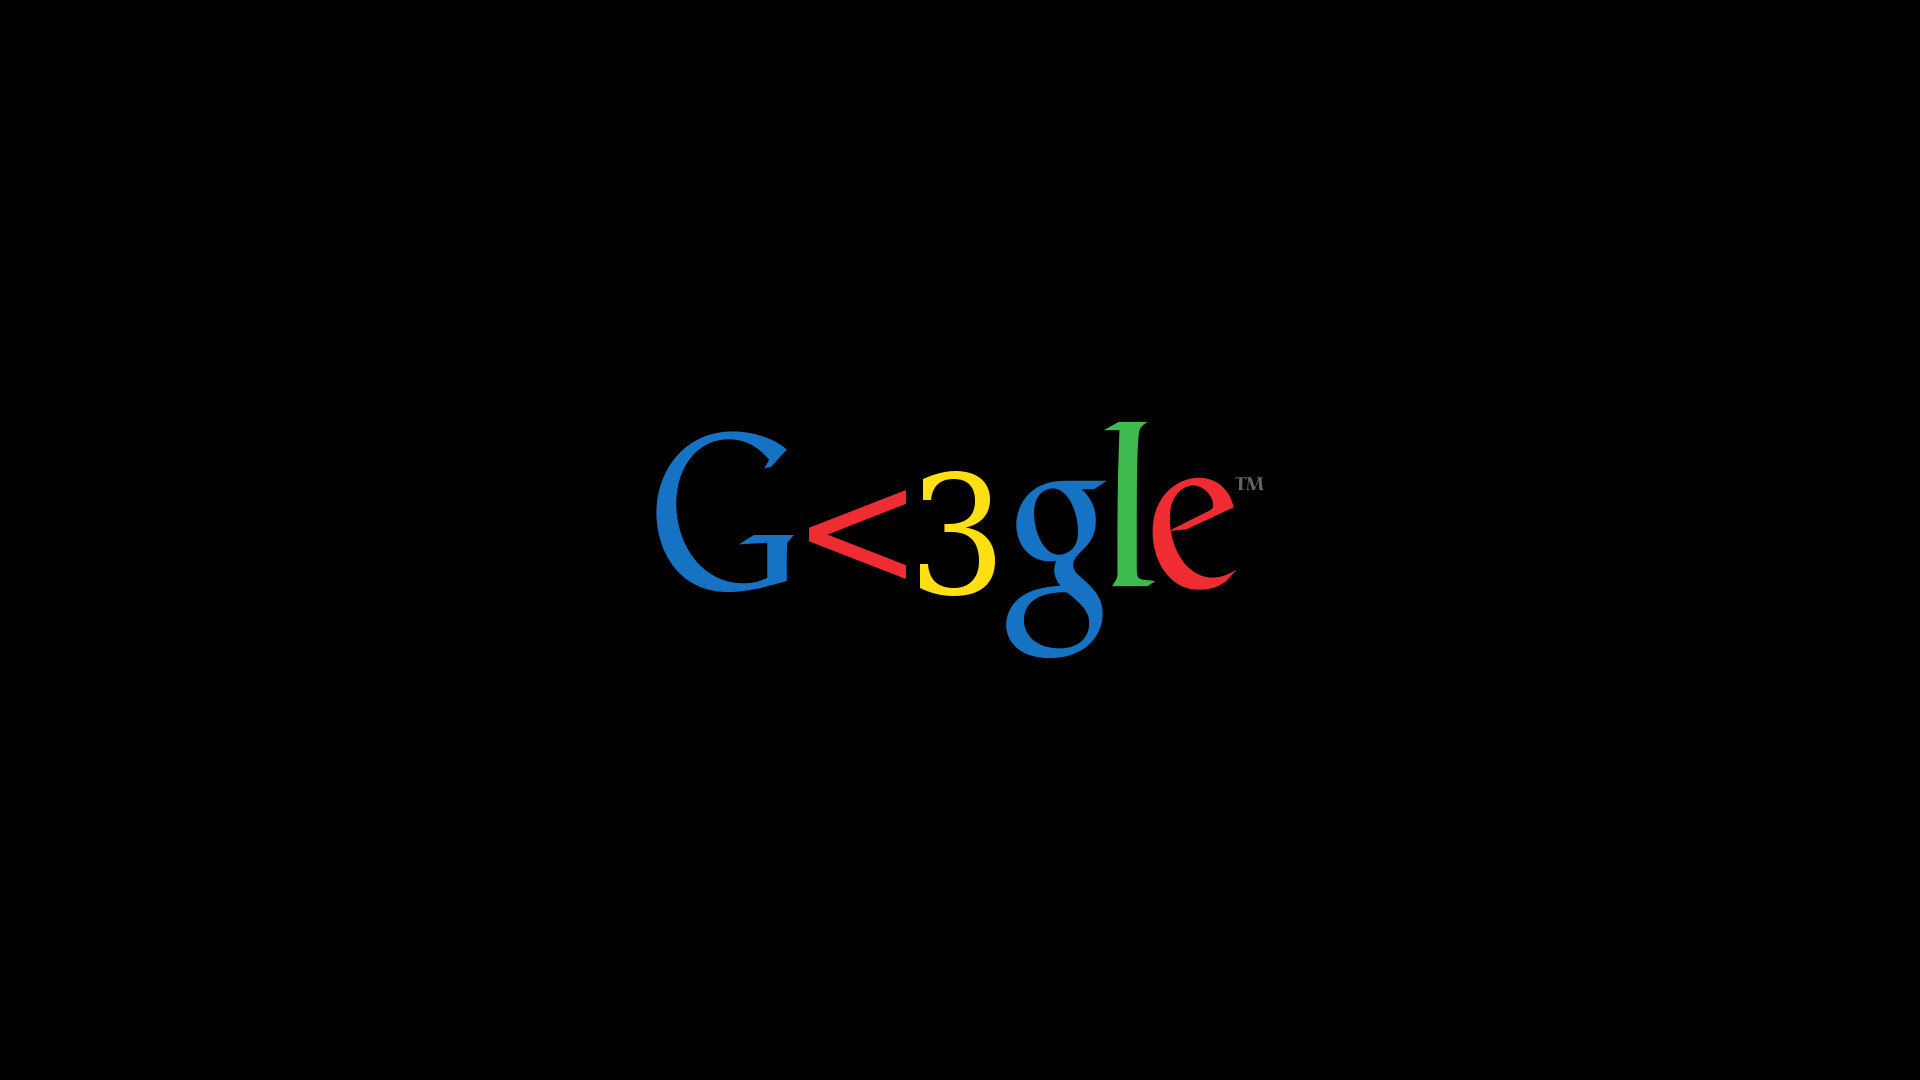 Google: The most visited website worldwide along with YouTube. 1920x1080 Full HD Wallpaper.